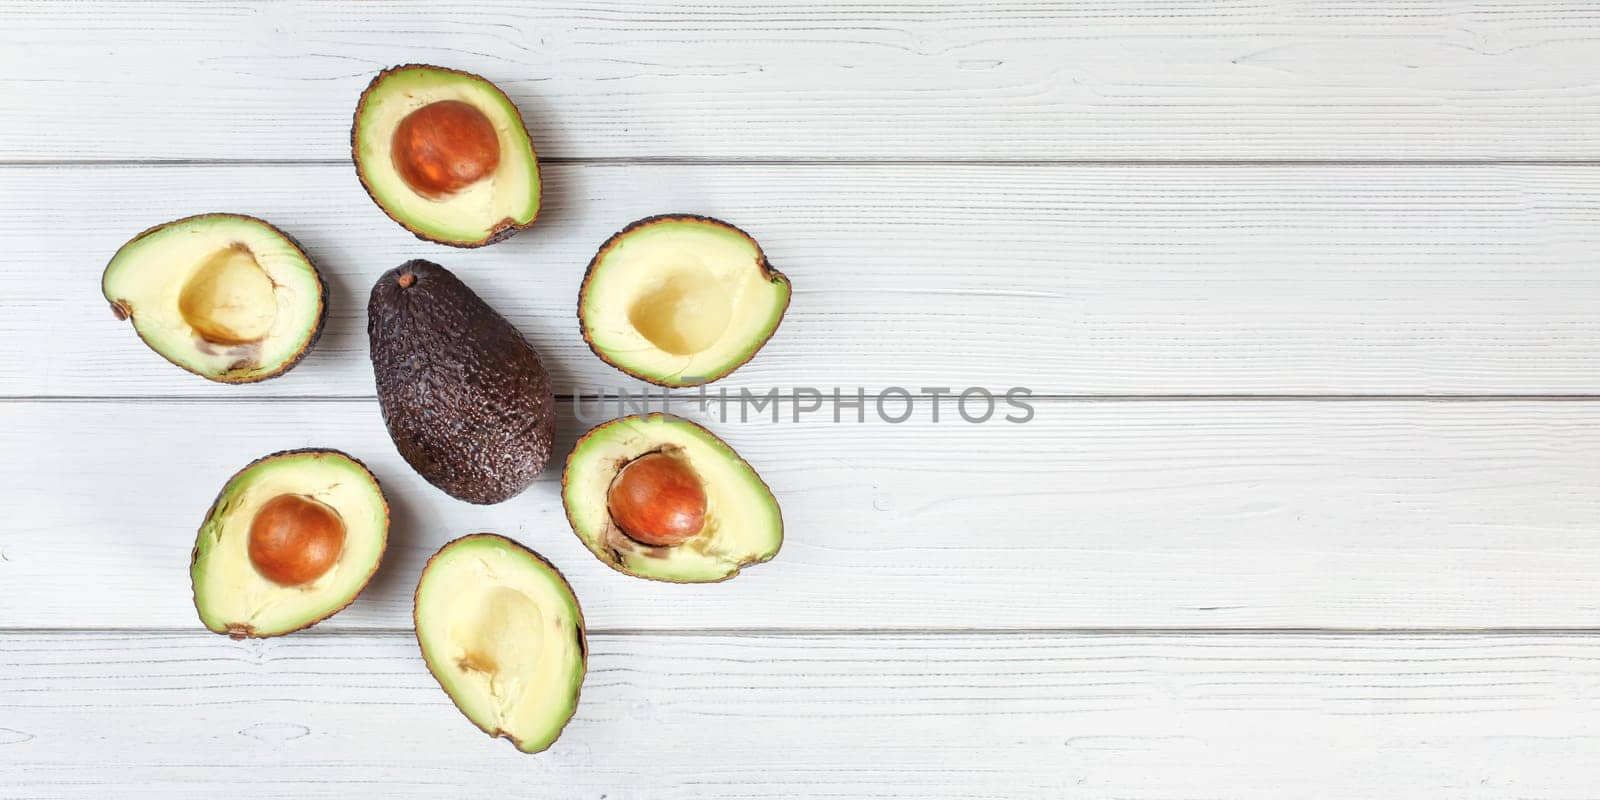 Ripe avocado halves arranged around whole dark brown pear (hass / bilse fruit variety) on white boards desk, banner with space for text right by Ivanko